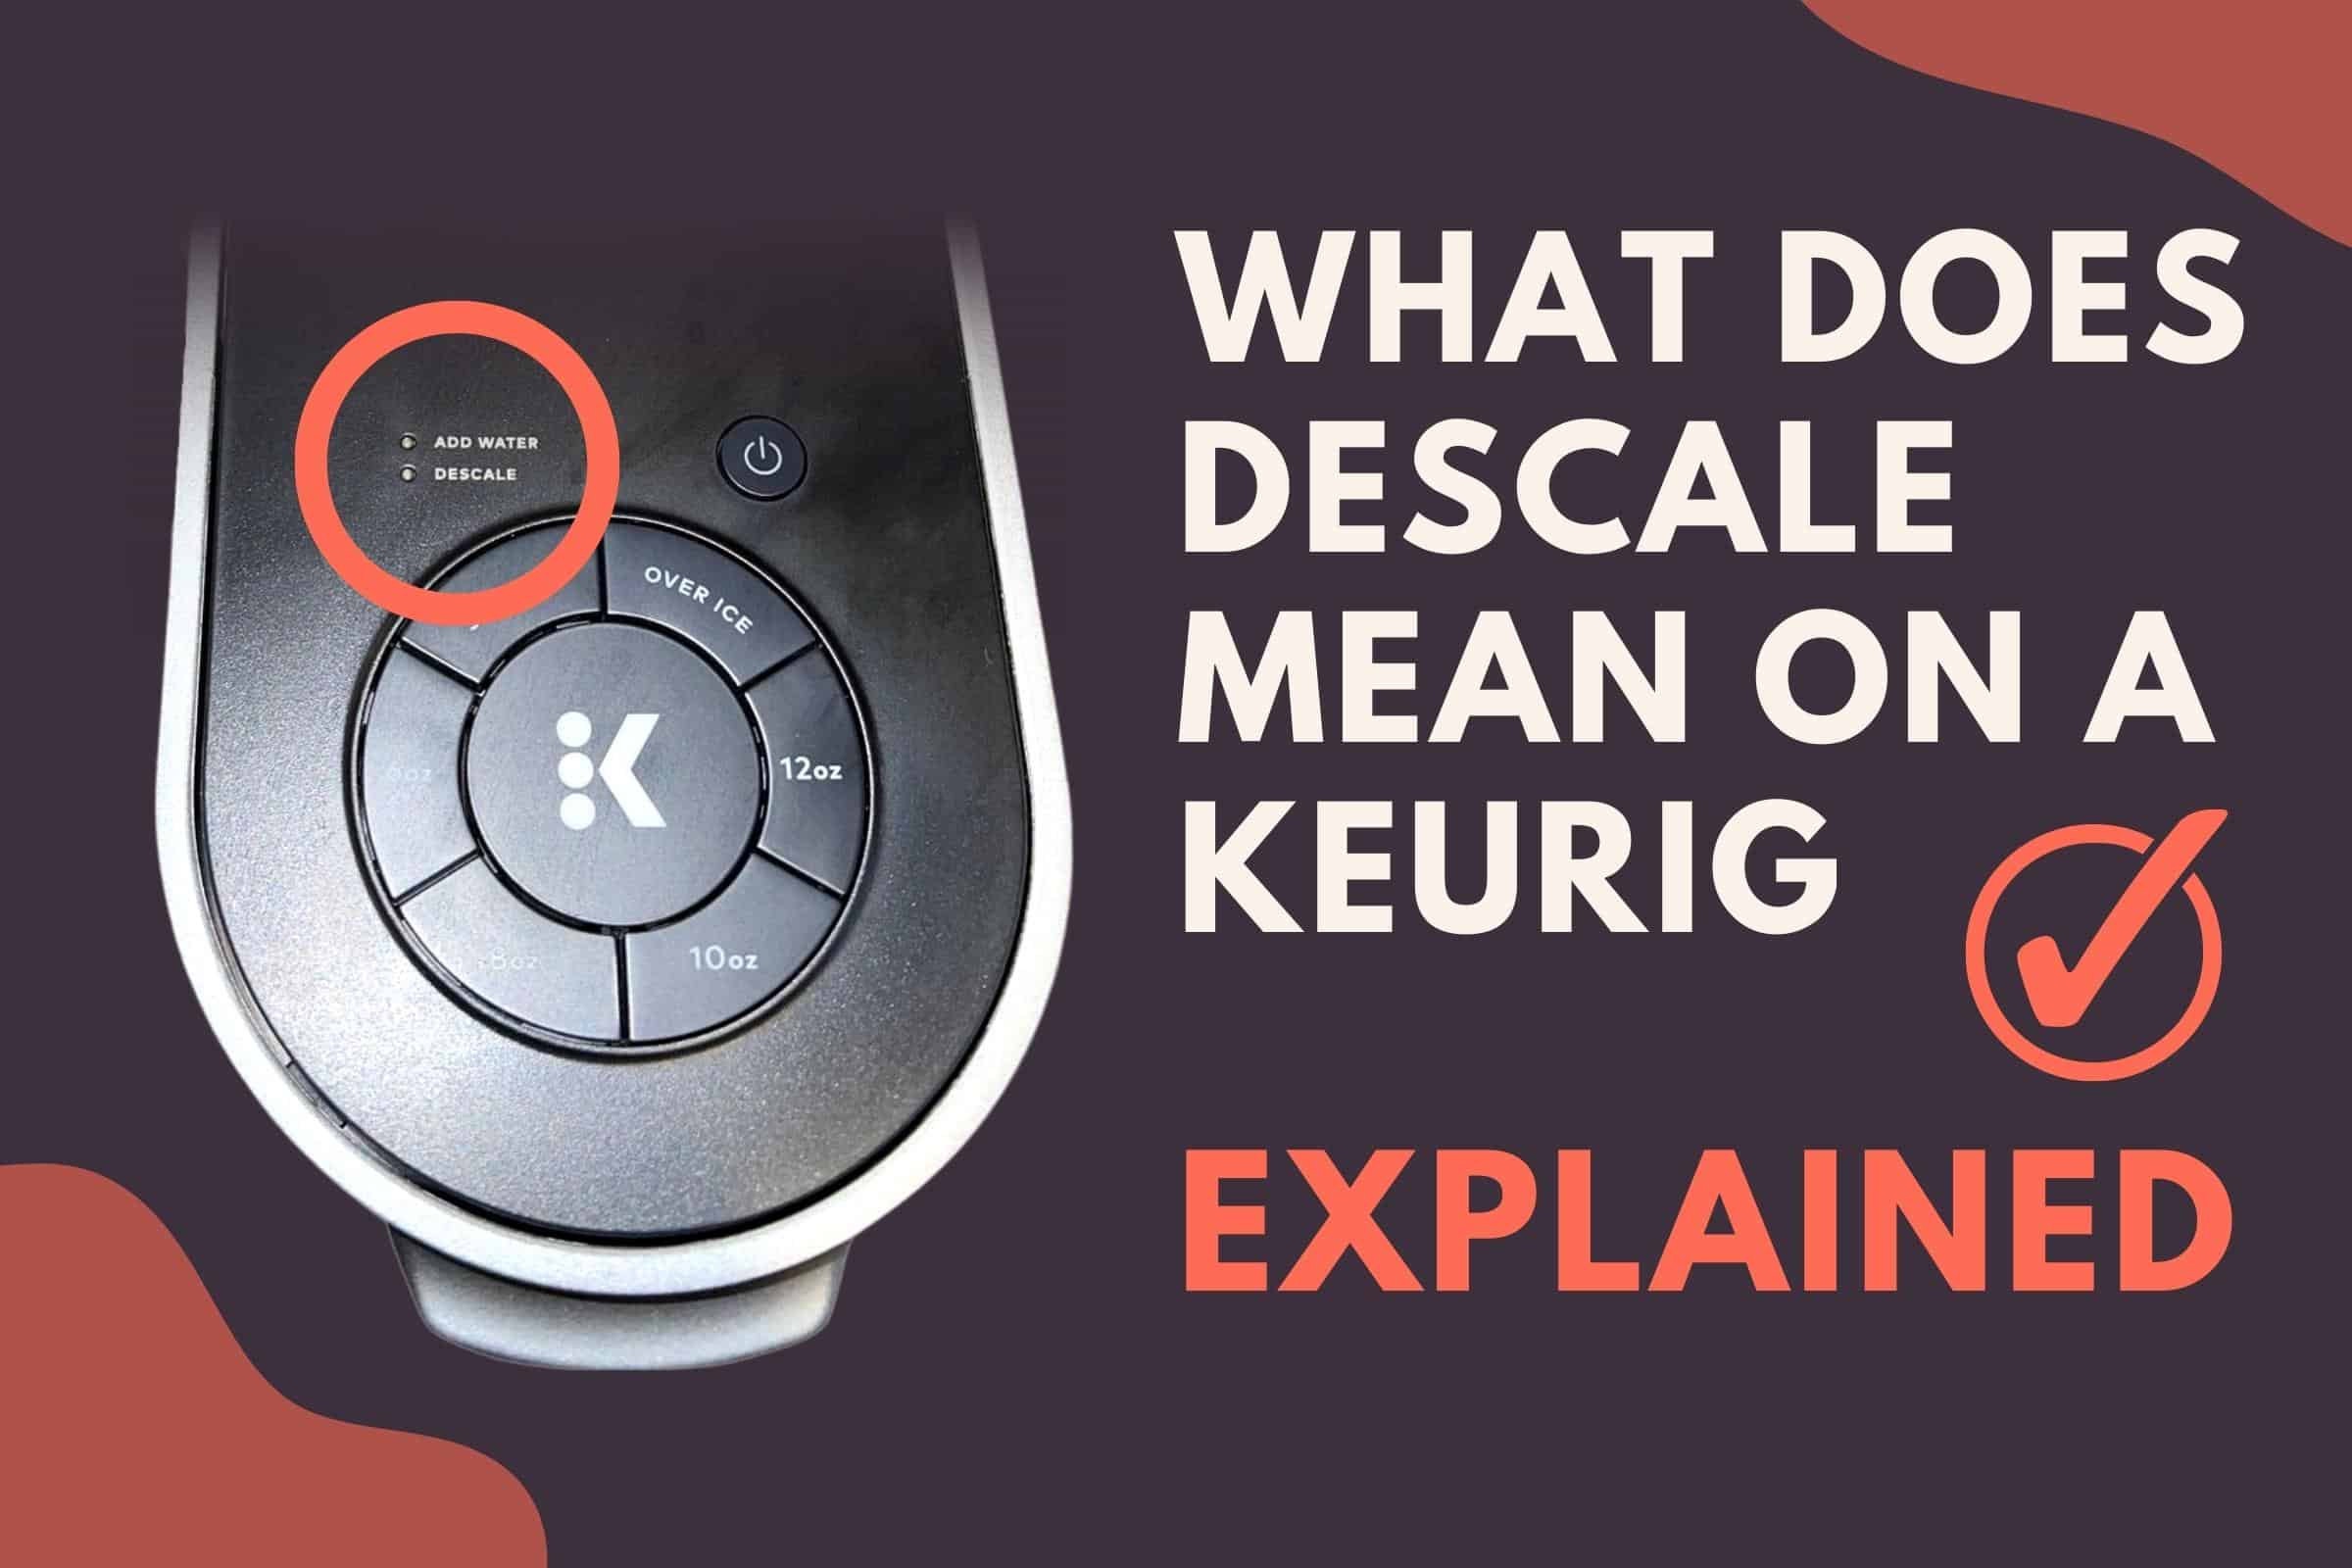 what does descale mean on a keurig